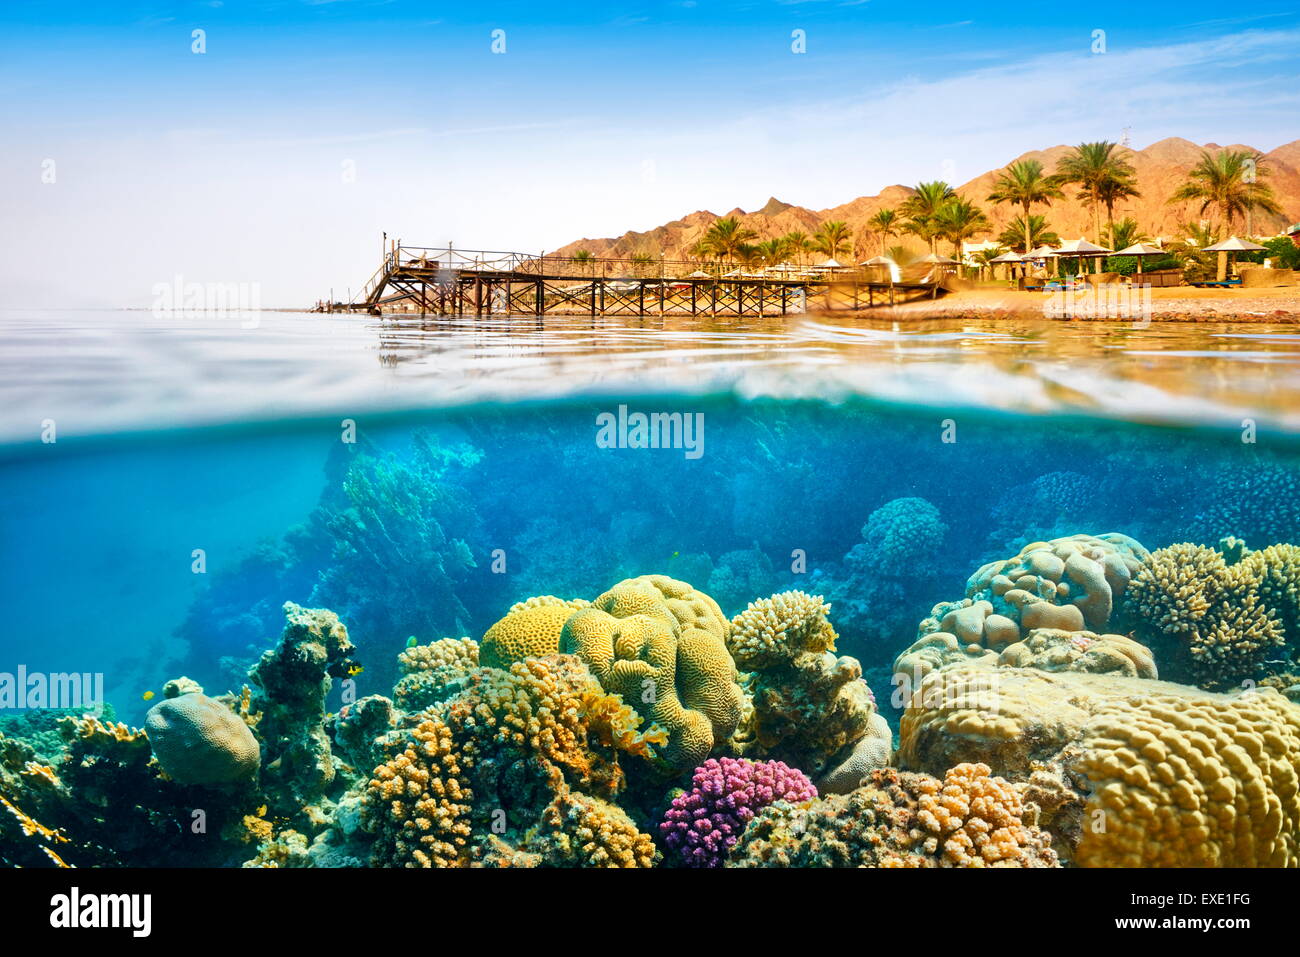 Underwater view, coral reef, Dahab, Red Sea, Egypt Stock Photo